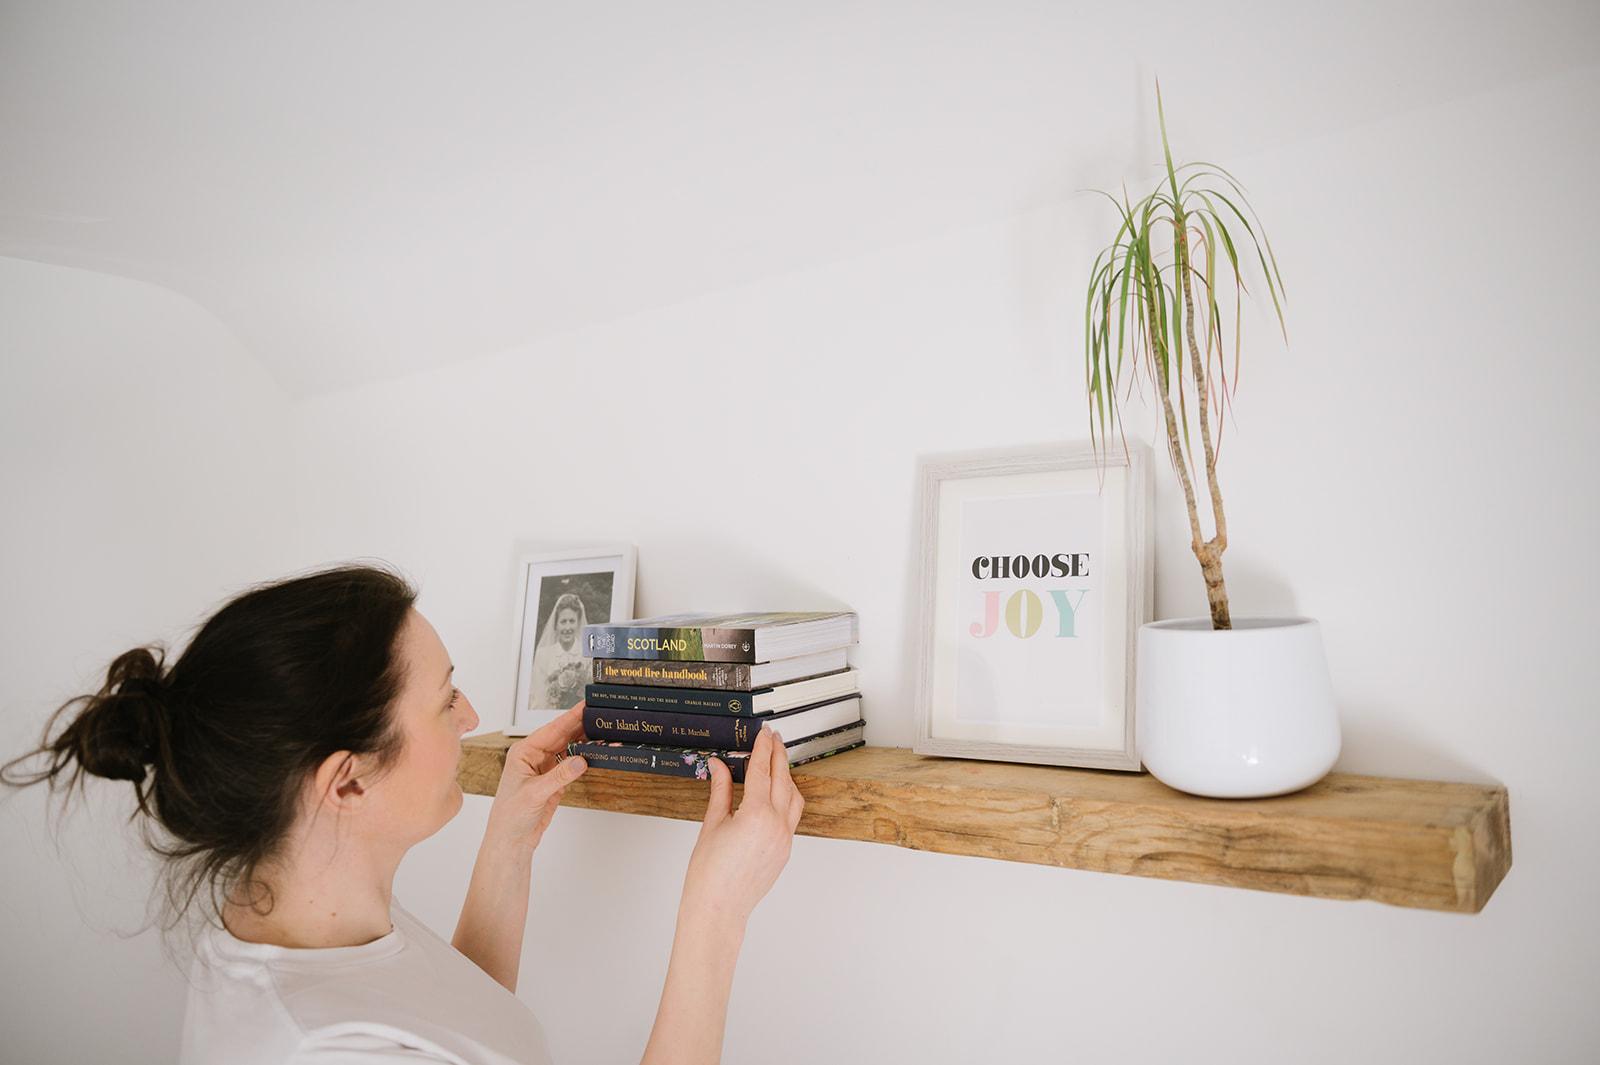 woman in a white t-shirt arranging items on a shelf for her business photos